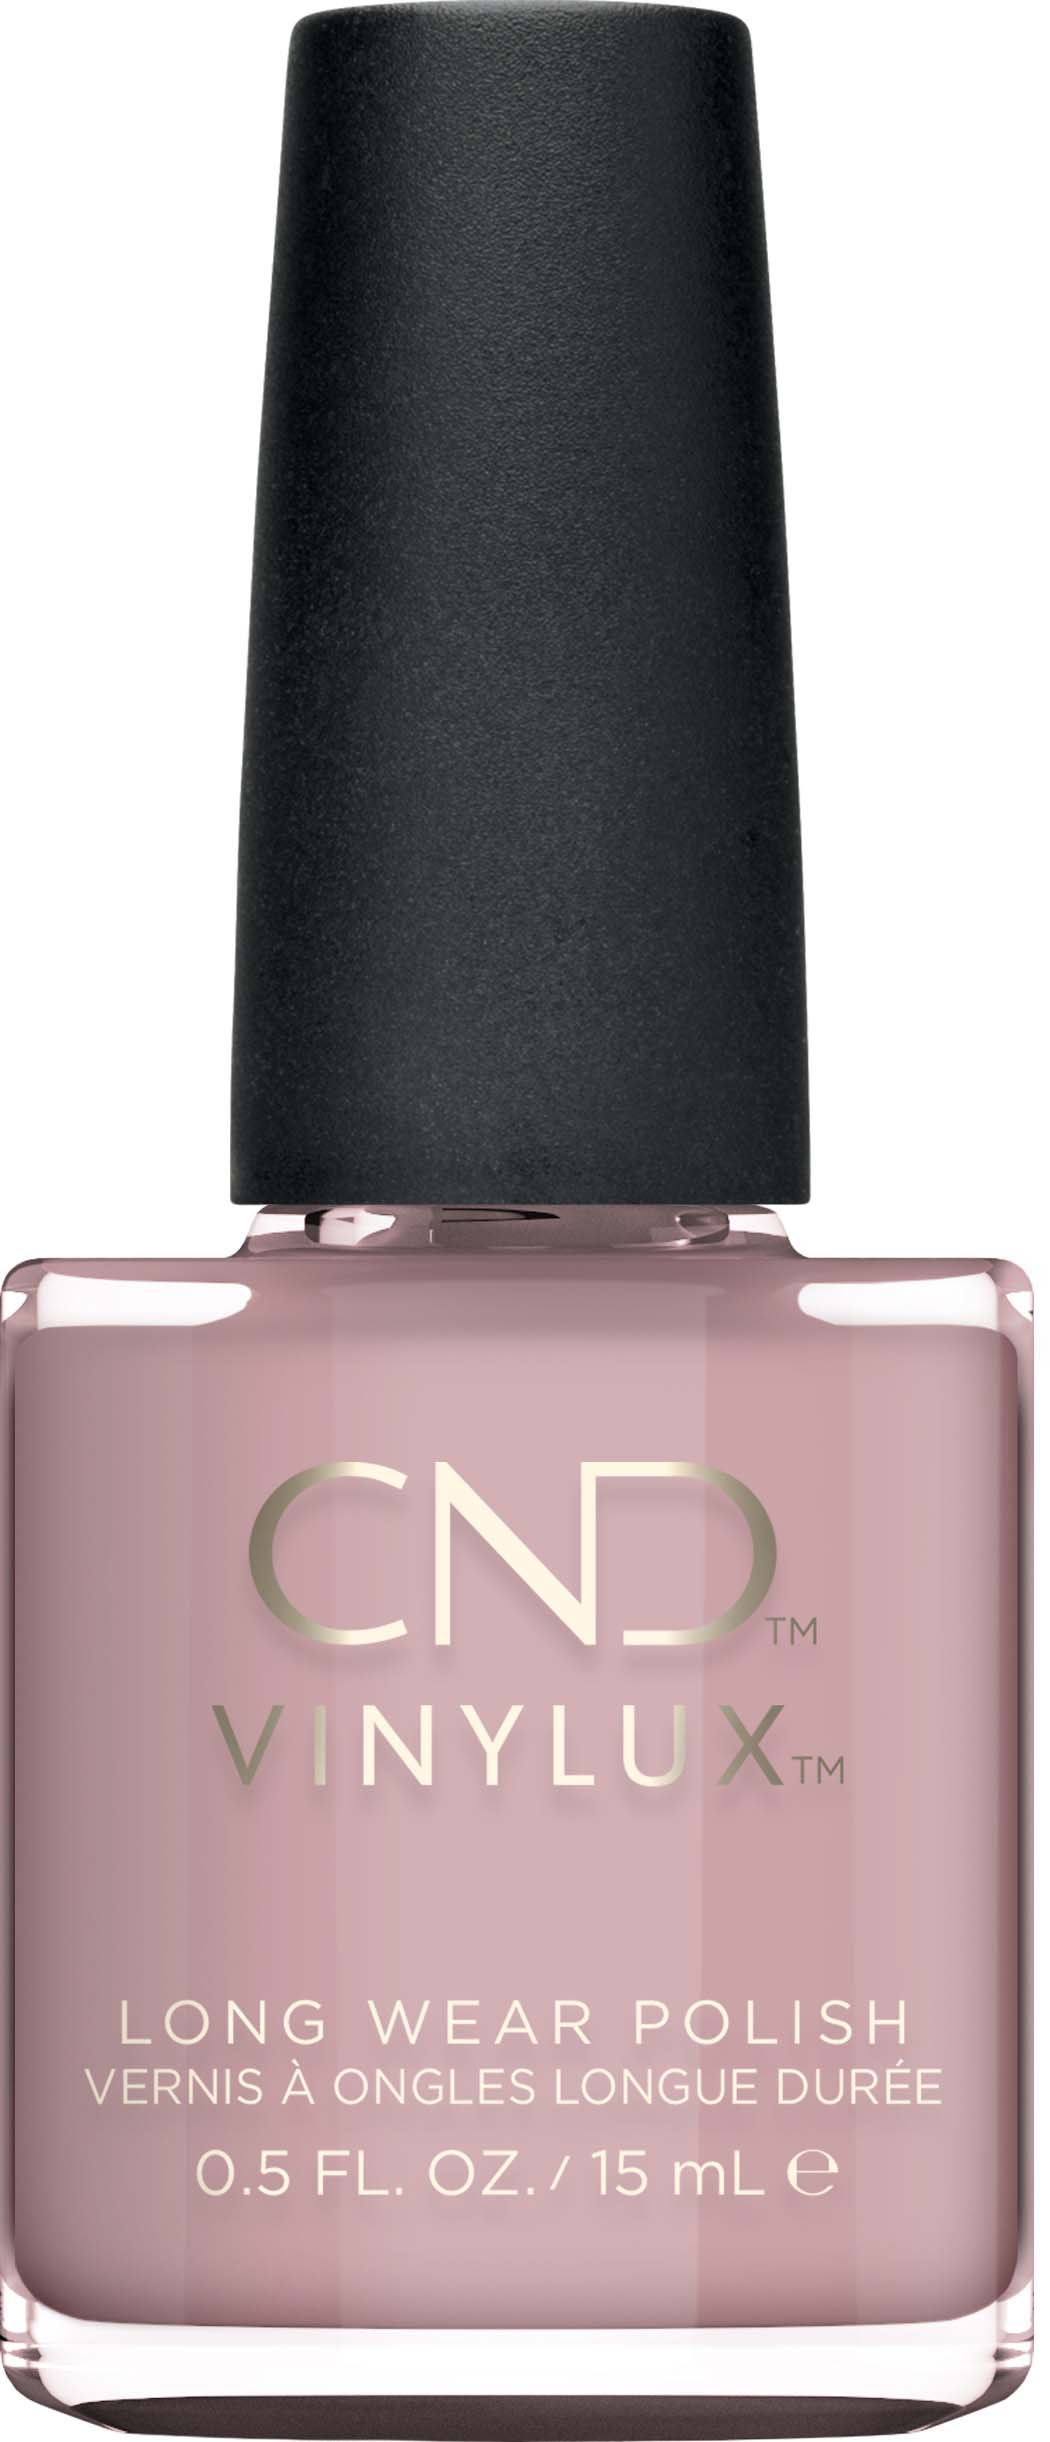 Vinylux Weekly Polish - 195 Naked Naivete by CND for Women - 0.5